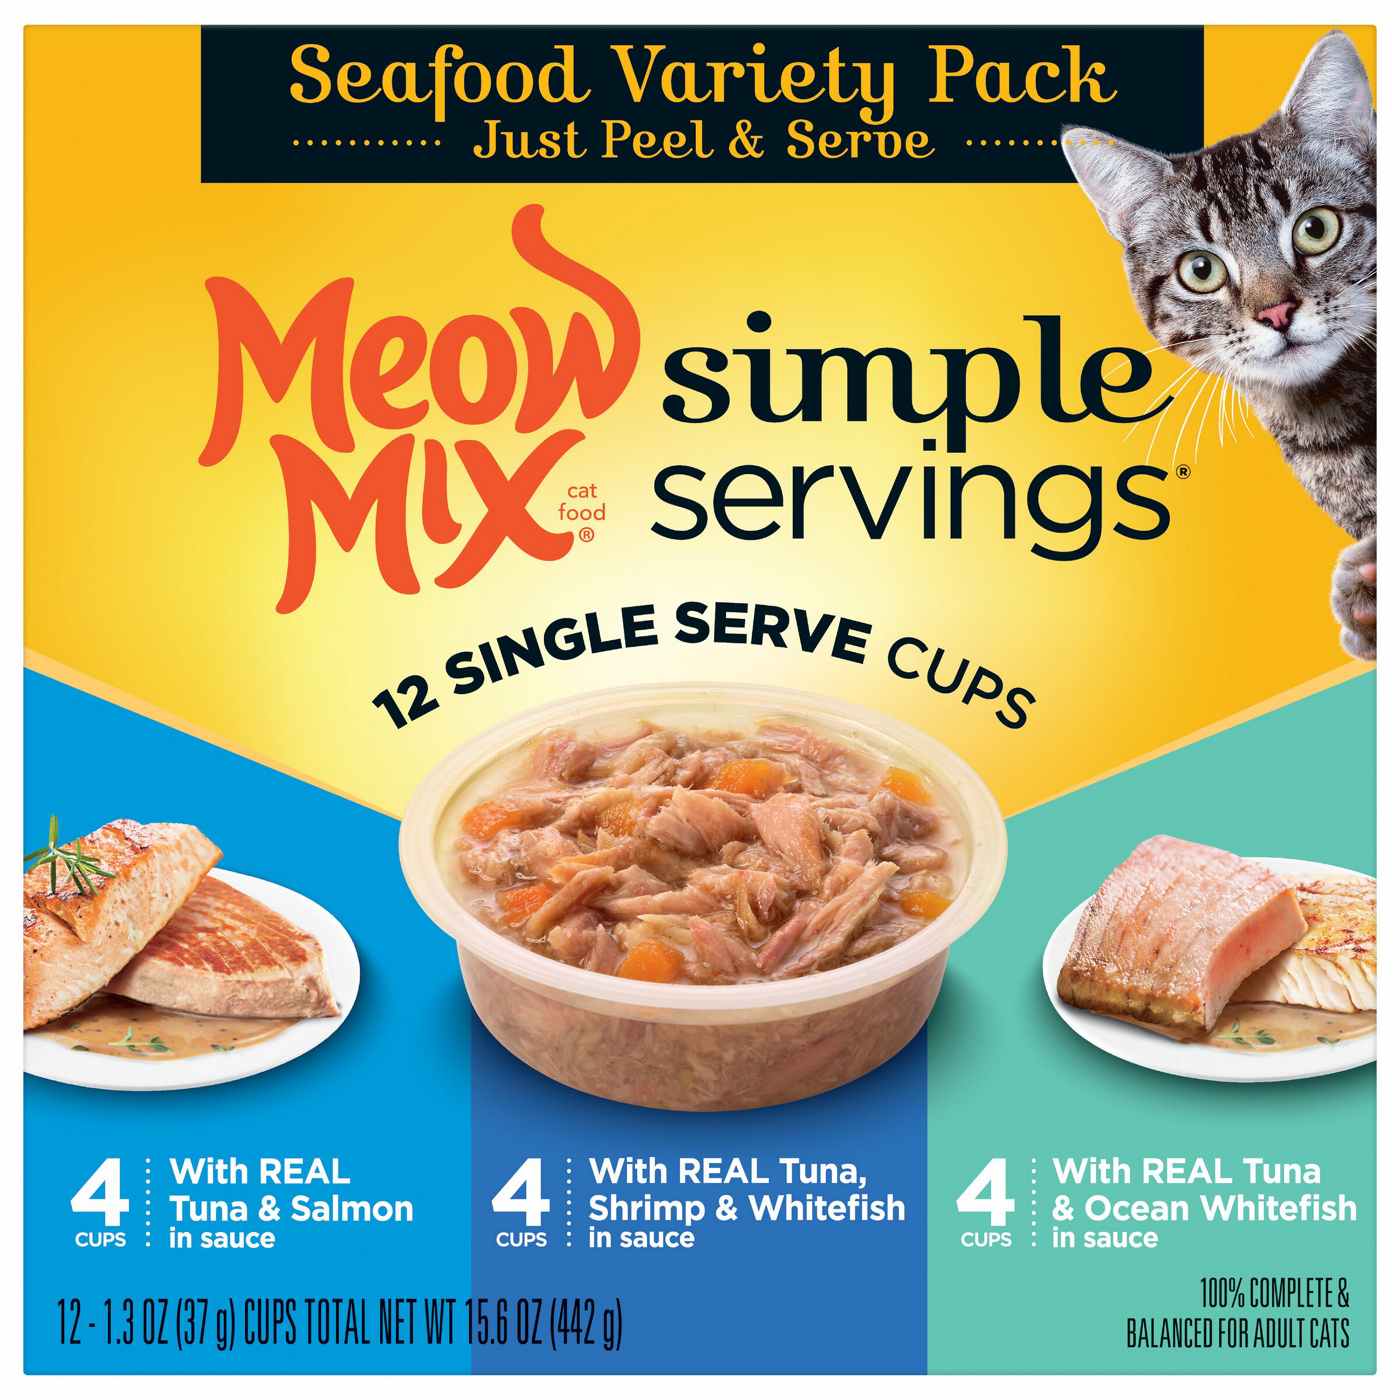 Meow Mix Simple Servings Seafood Wet Cat Food Variety Pack; image 1 of 2